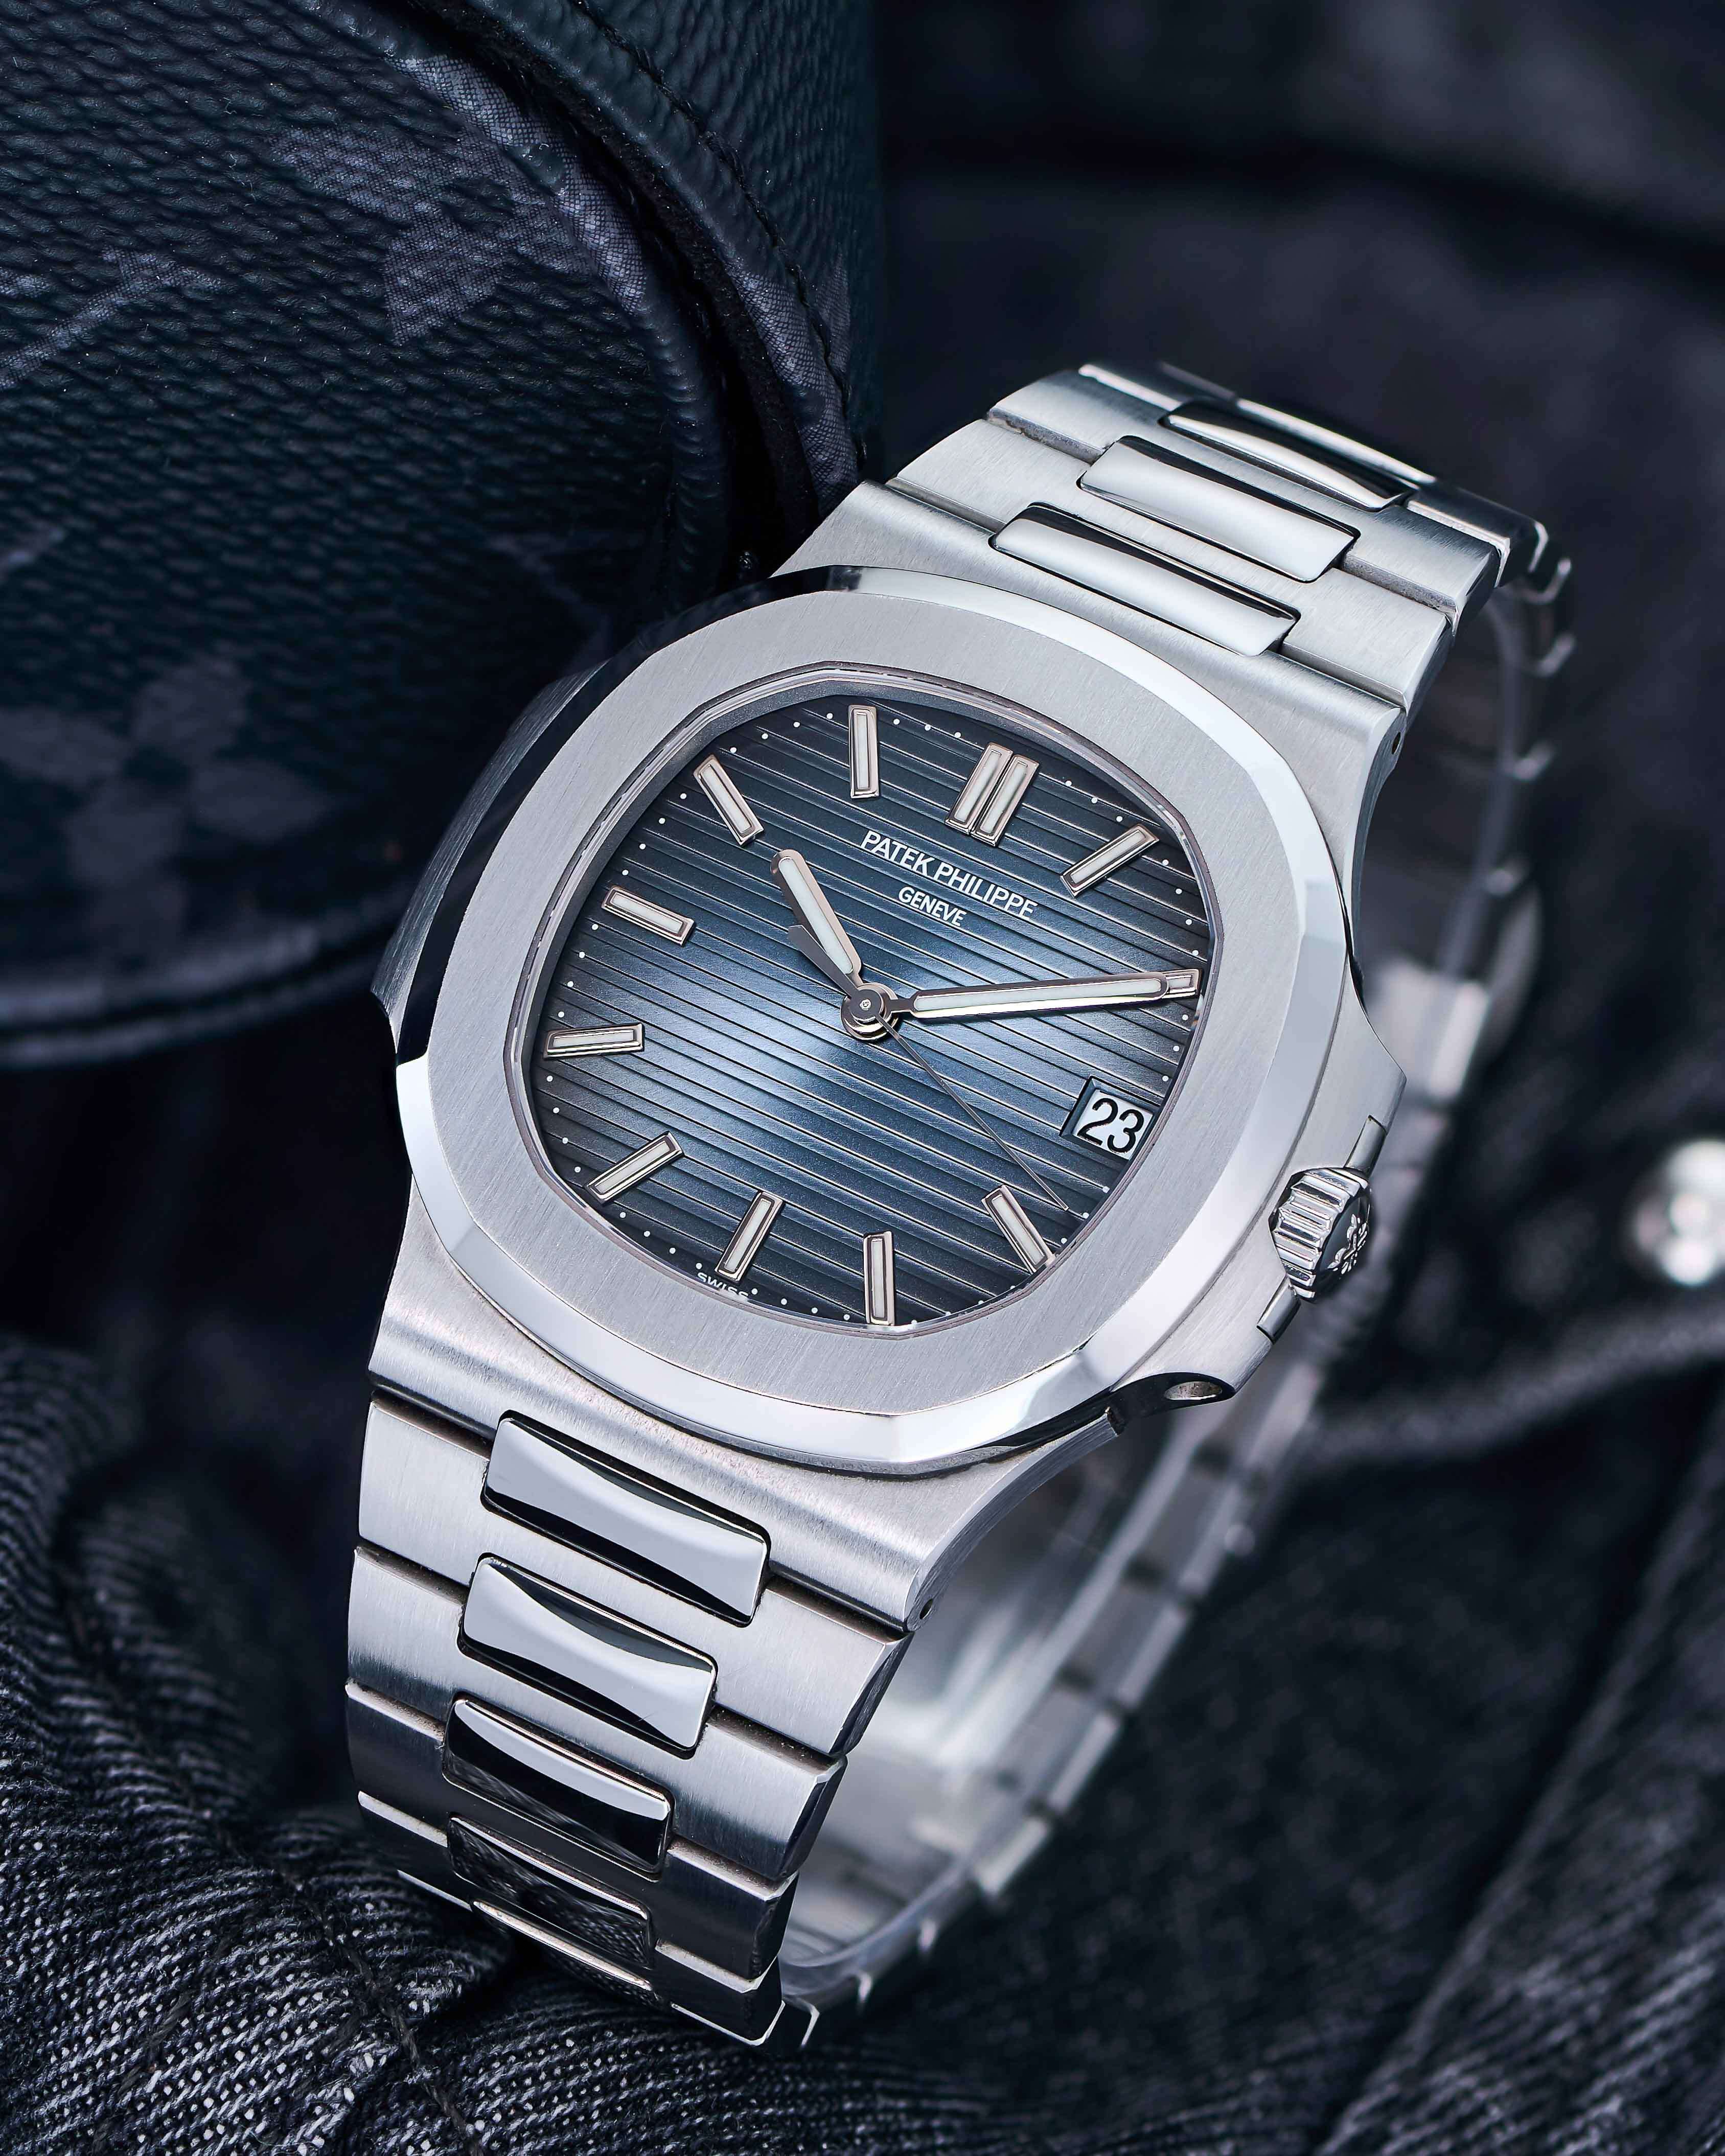 Patek Philippe Timepiece with Stainless Steel Bracelet on a Navy Jean Background